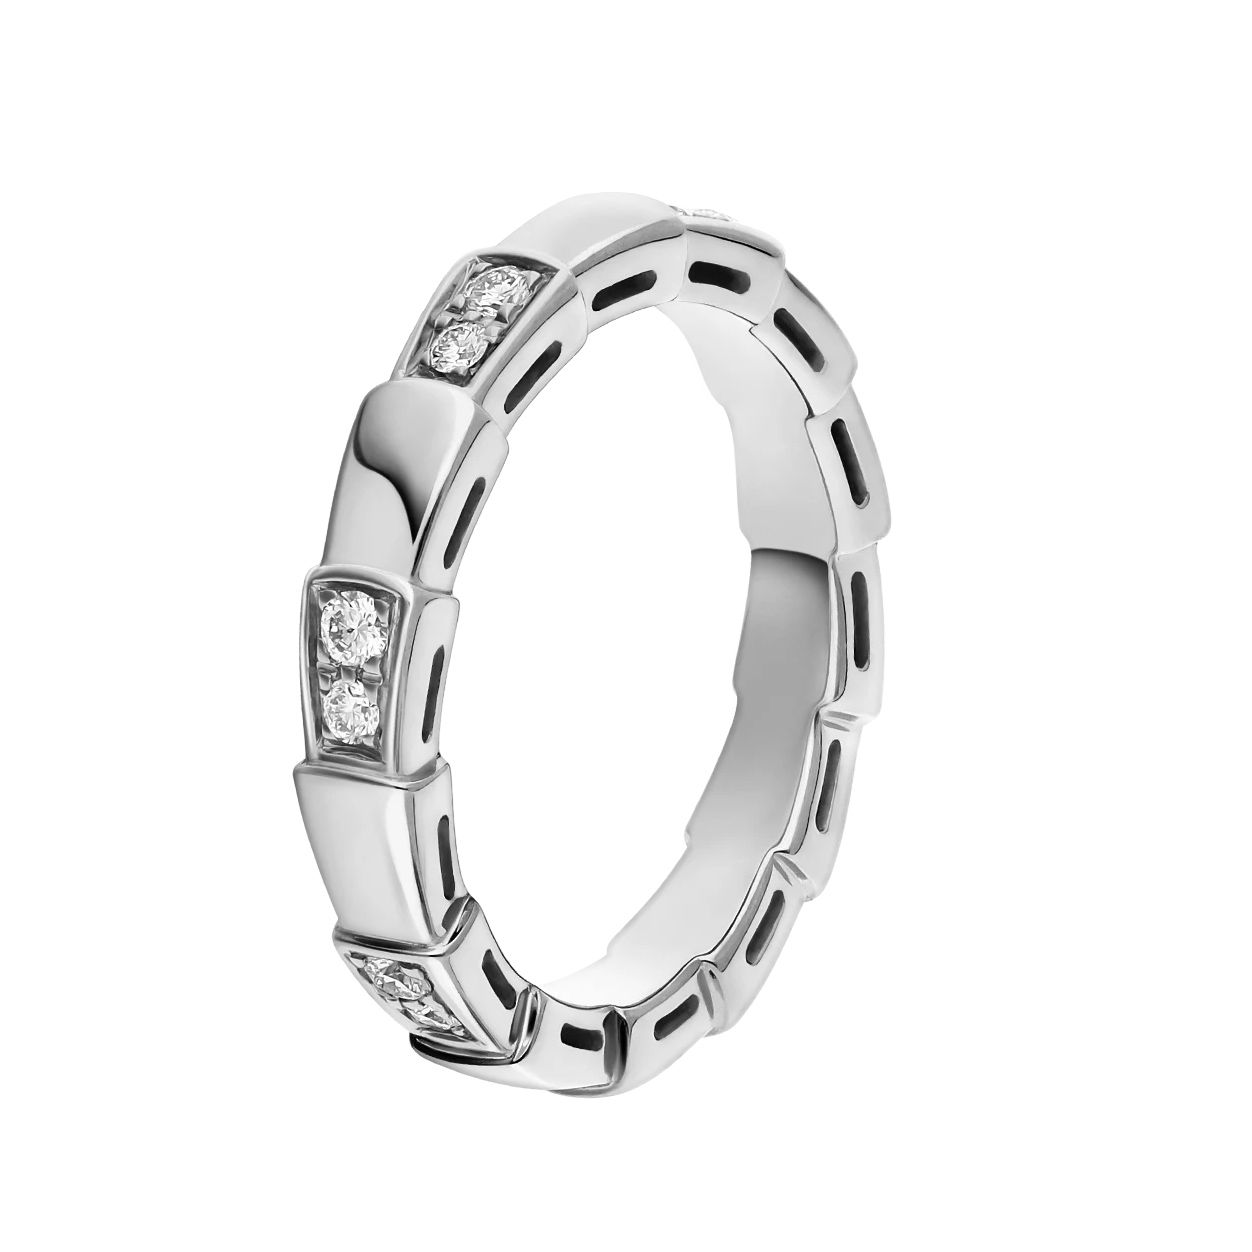 Wholesale Custom band ring in 18 kt OEM/ODM Jewelry white gold, set with demi-pavé diamonds 20 years in OEM jewelry